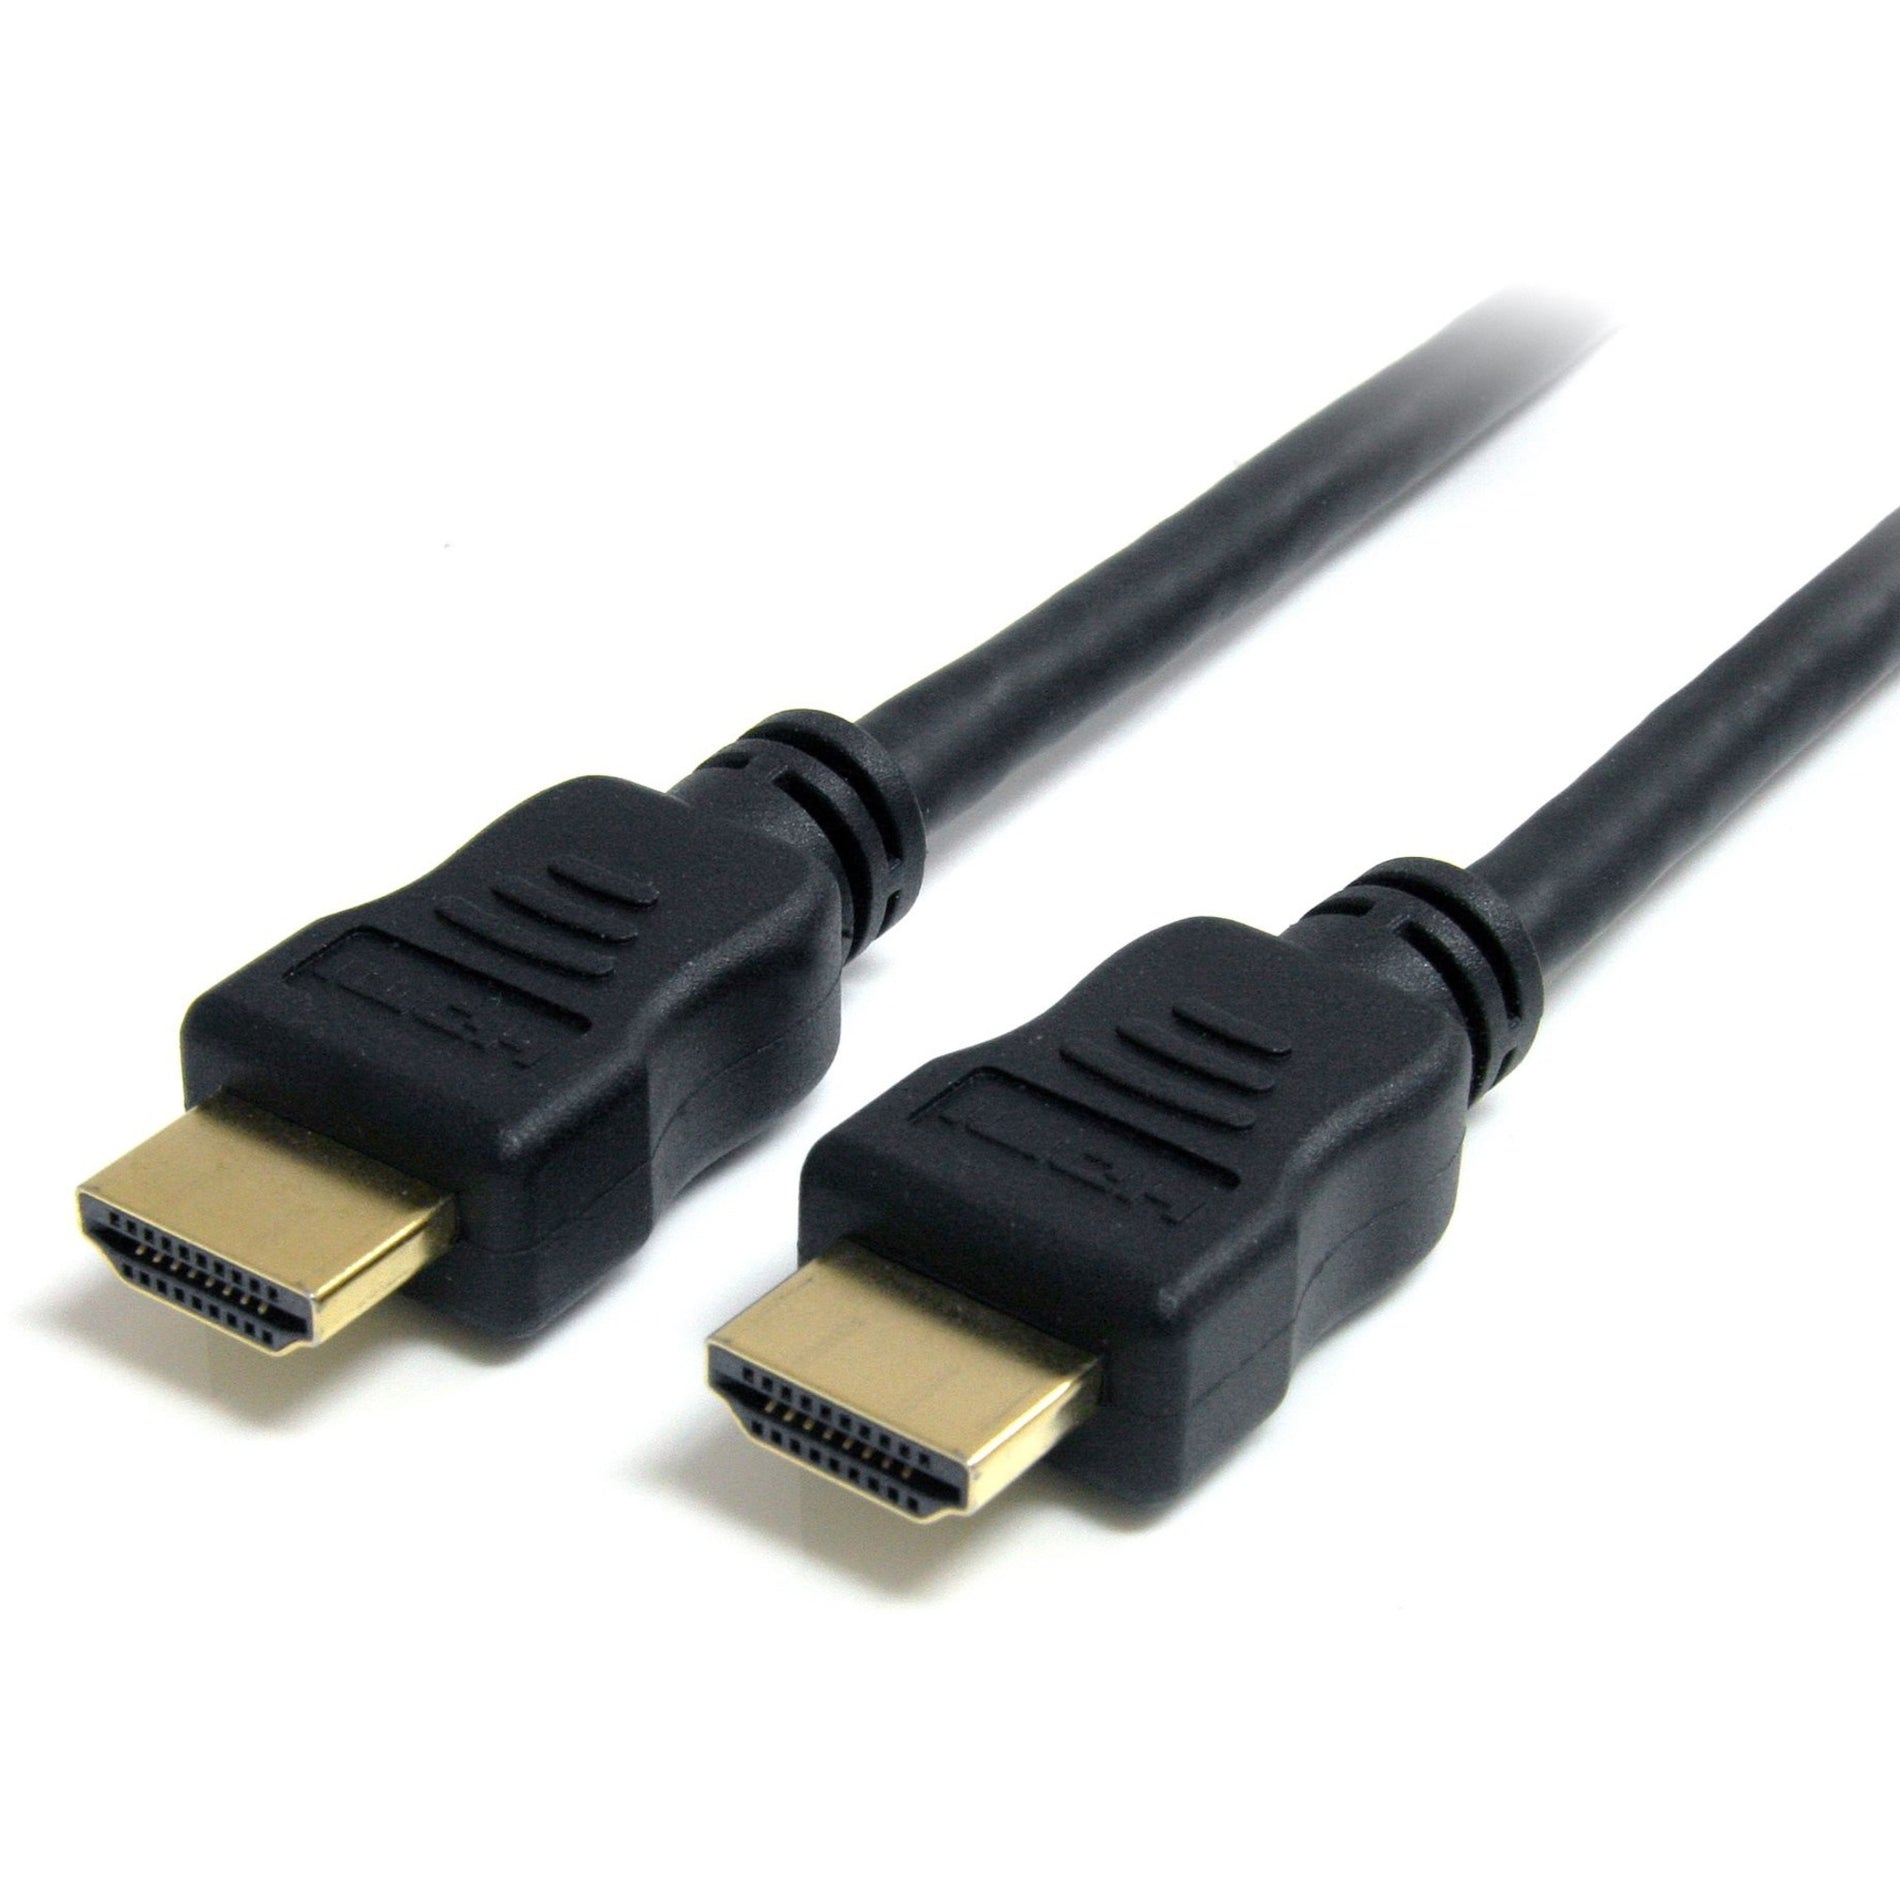 StarTech.com HDMIMM6HS HDMI Cable with Ethernet, 6 ft, Corrosion Resistant, 4096 x 2160 Supported Resolution, Gold Plated Connectors, Black